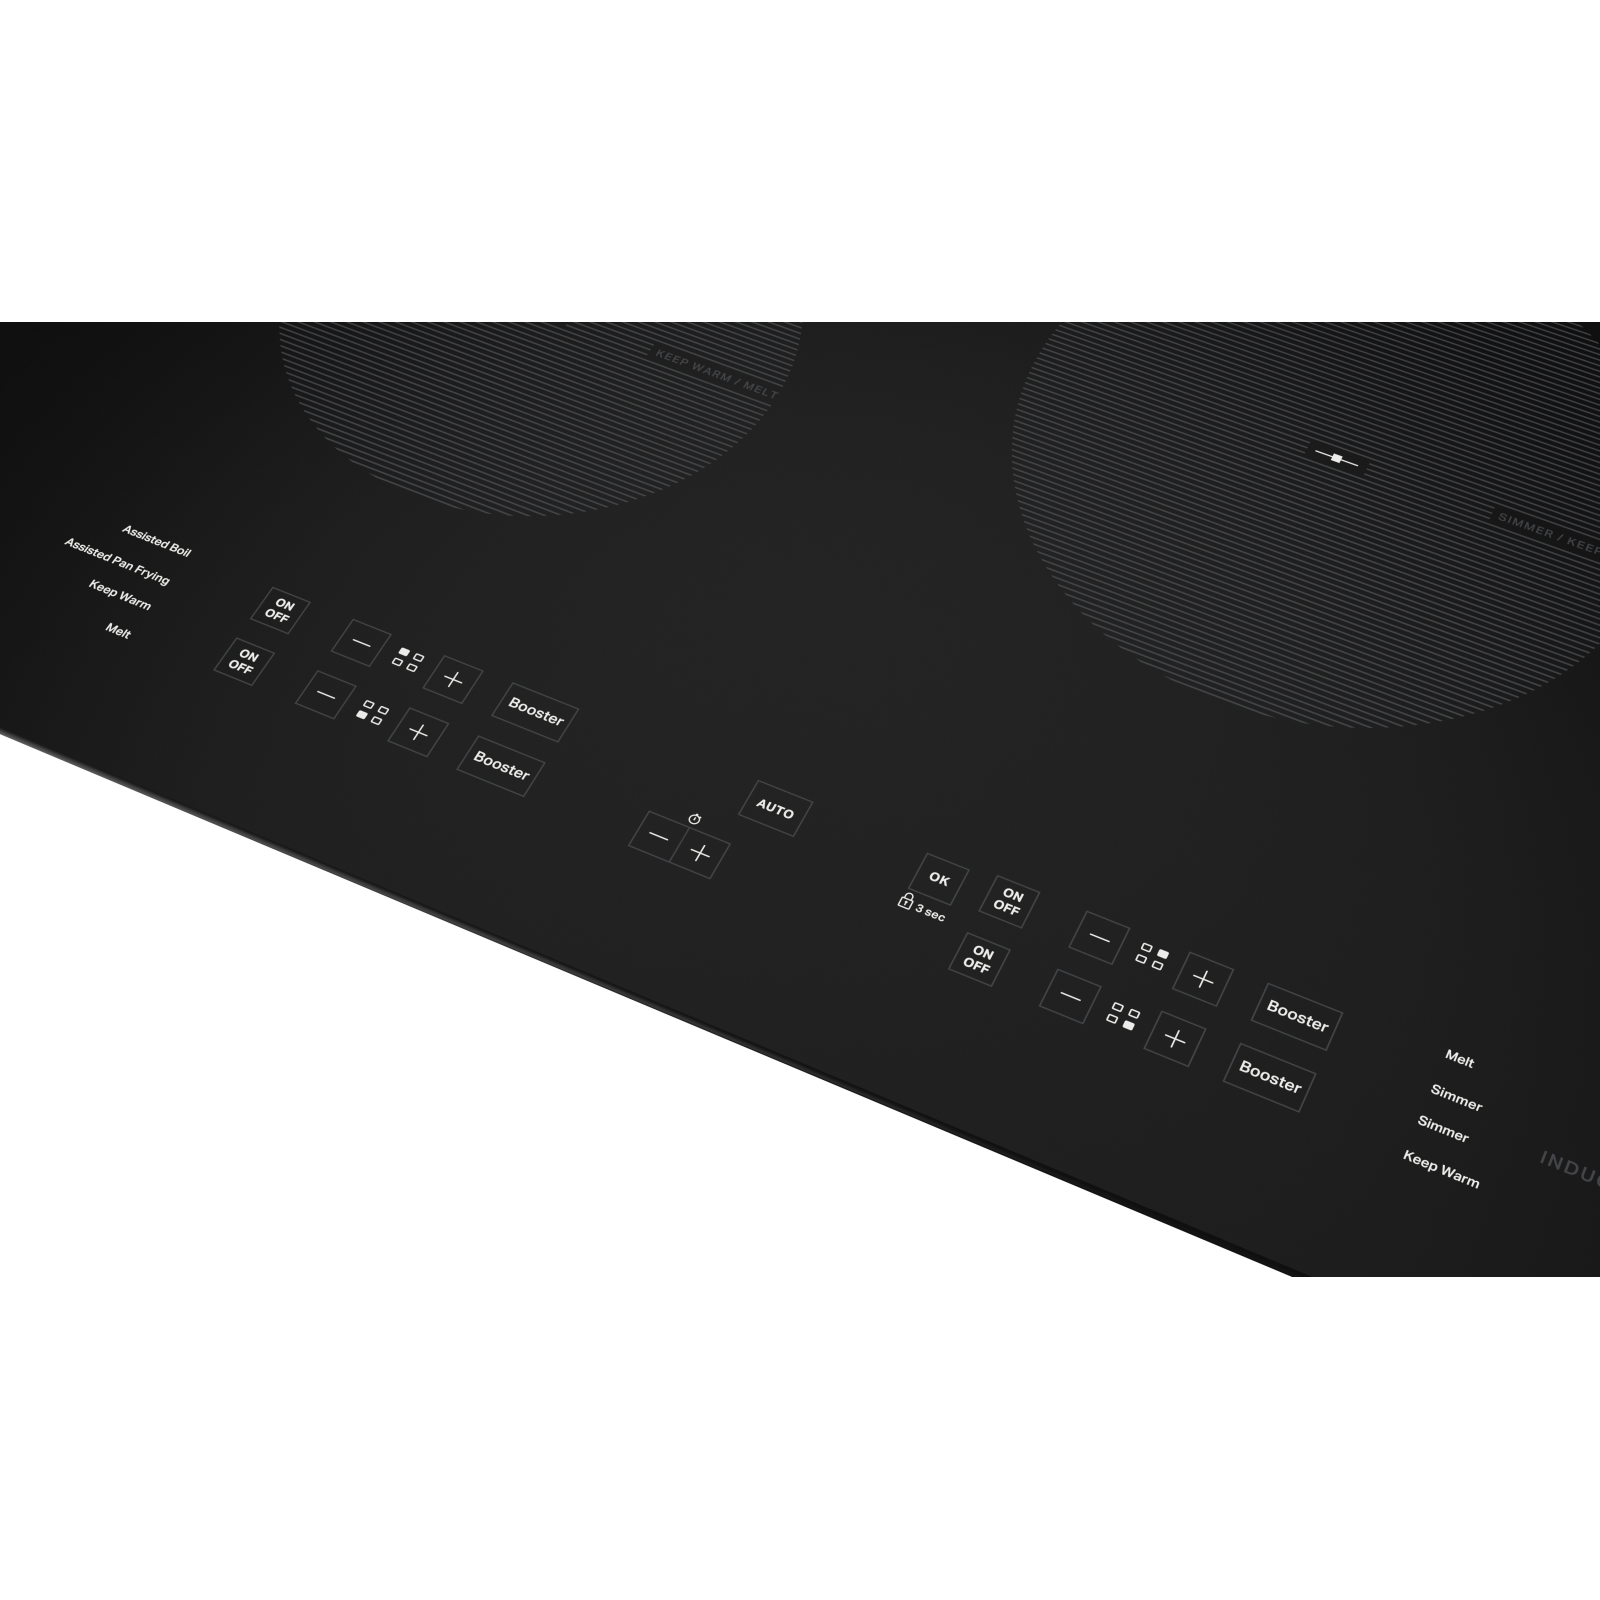 Whirlpool - 25.625 inch wide Induction Cooktop in Black - UCIG245KBL